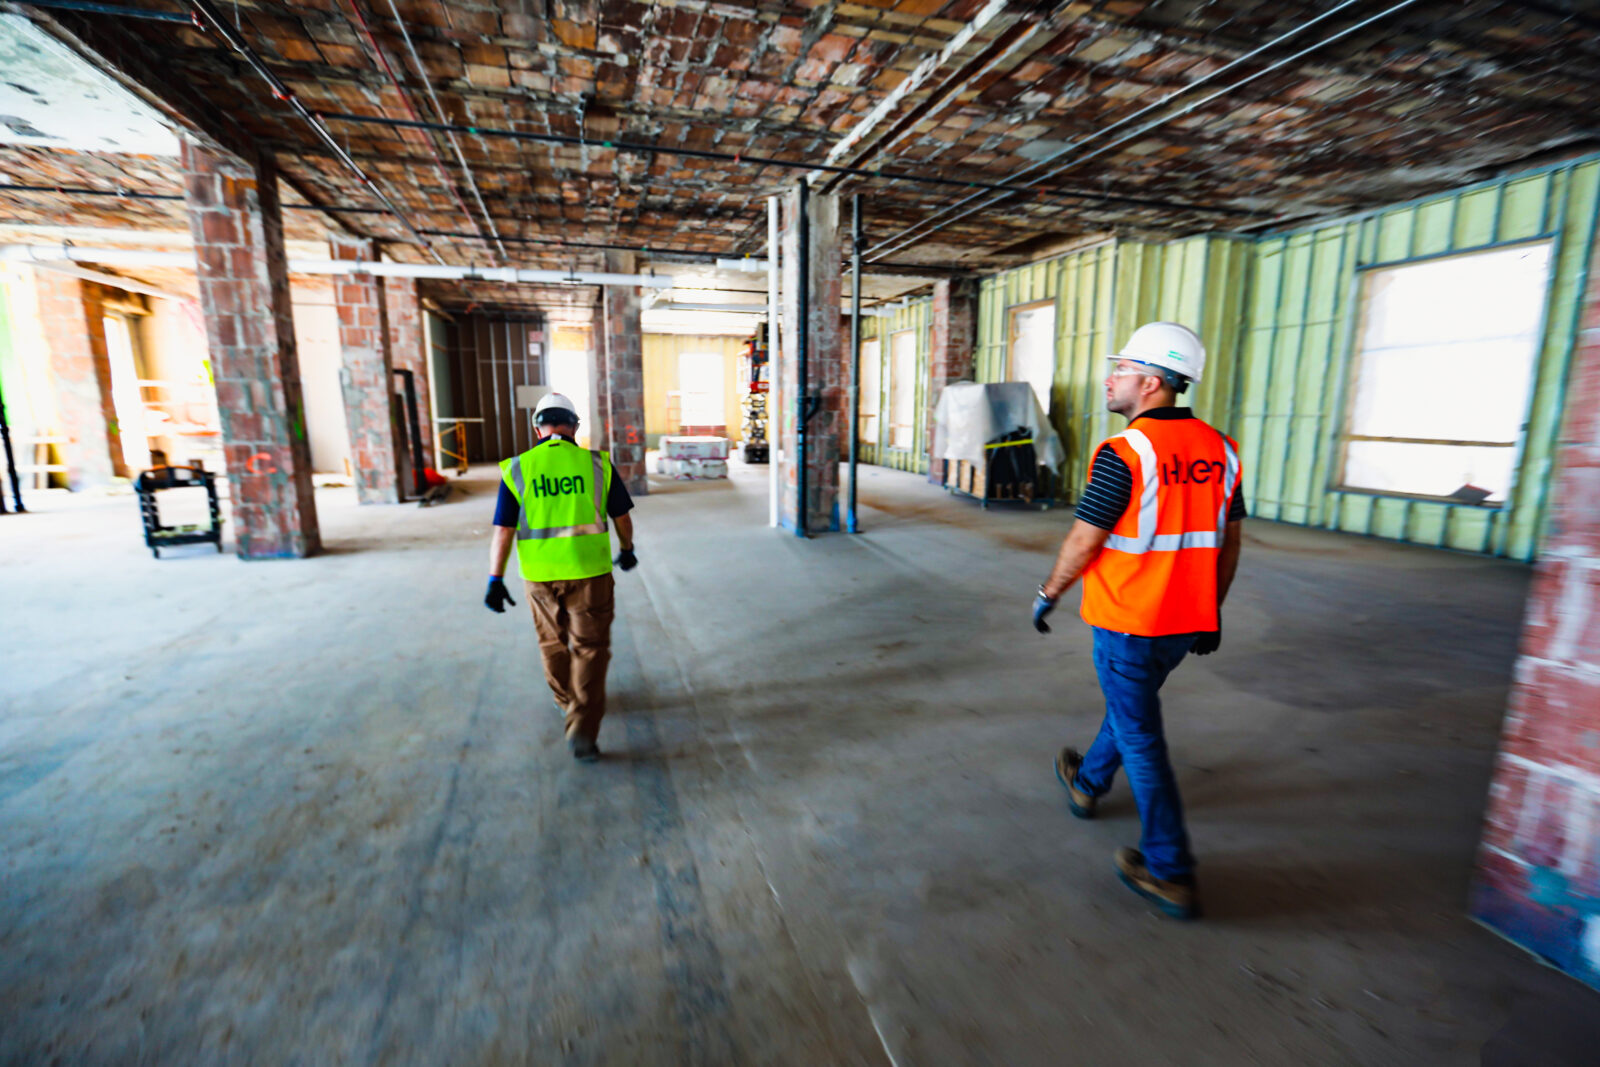 Two Huen workers walking in a large room during construction